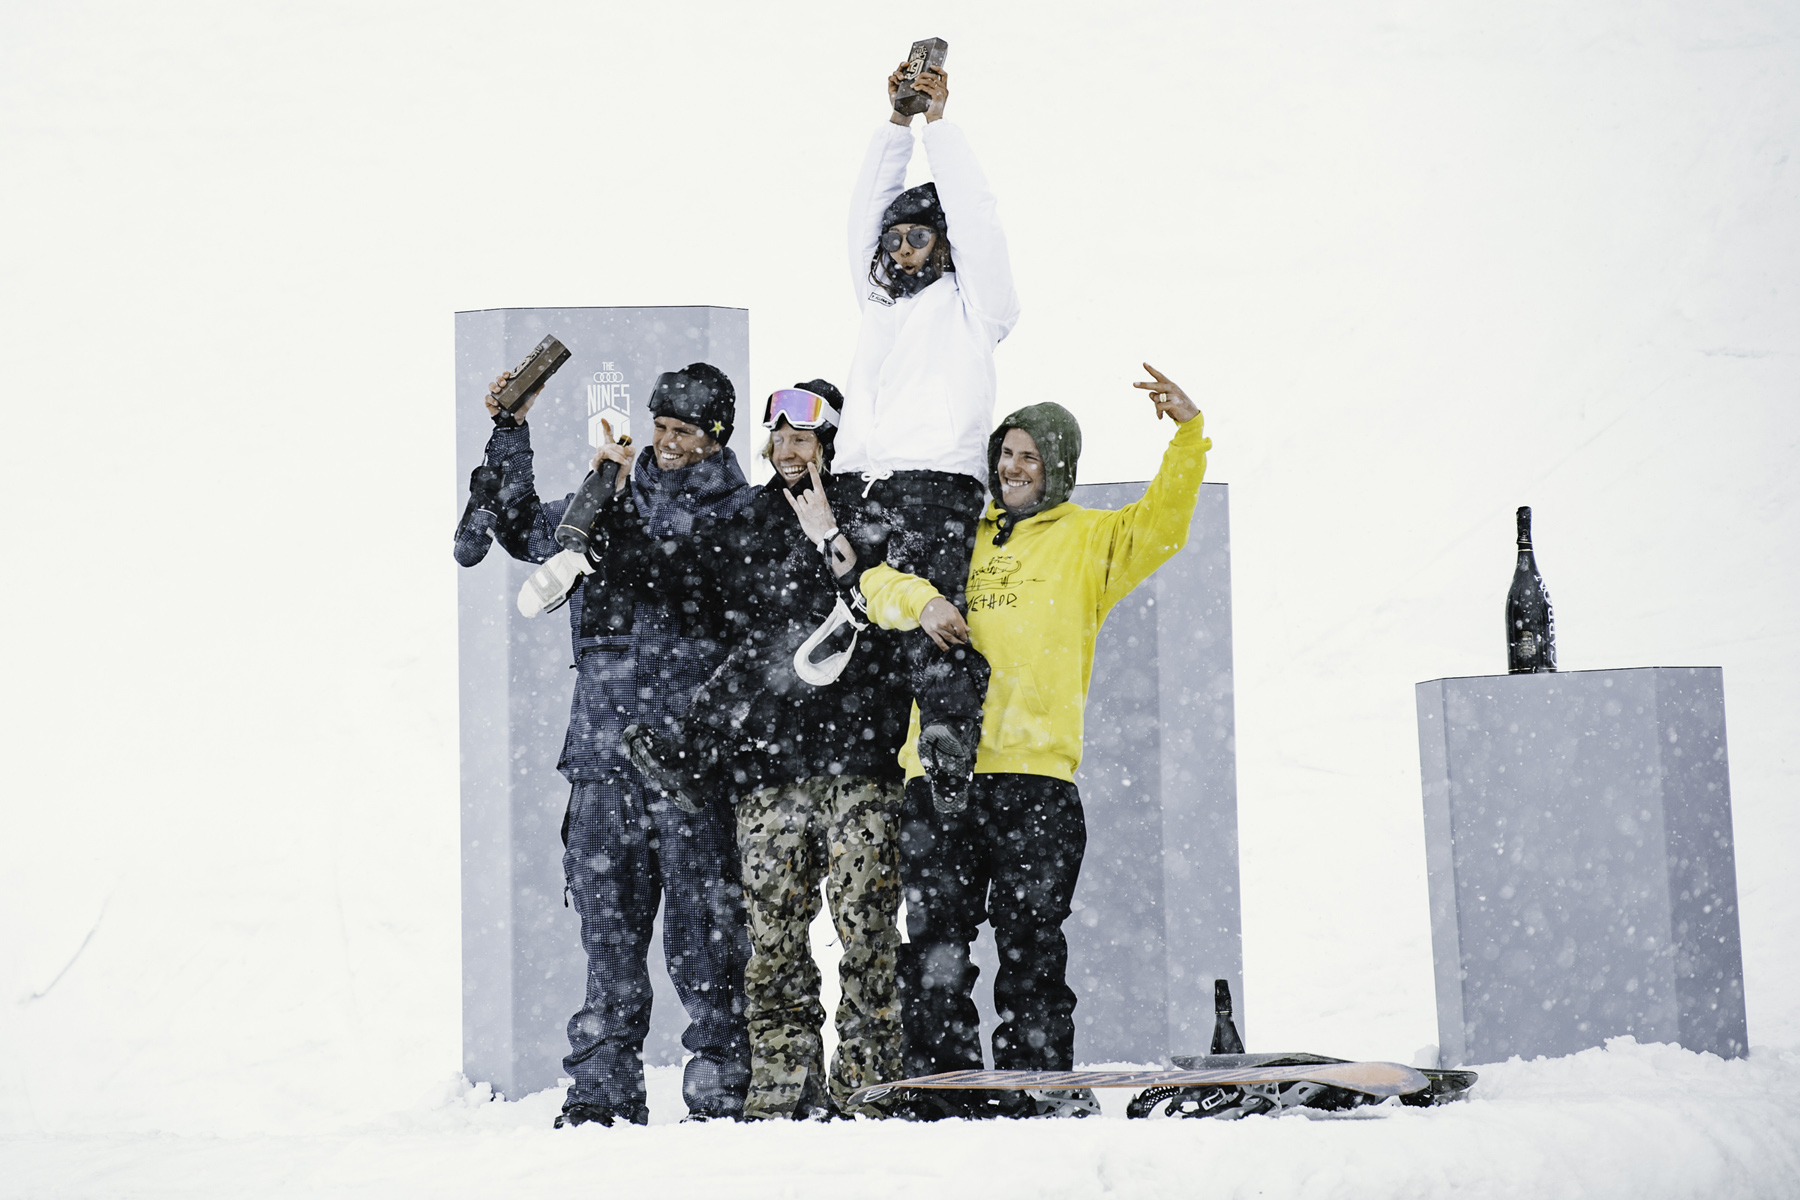 Monster Energy's Sven Thorgren Takes 2nd Place in Freestyle Snowboard Contest at Audi Nines in Sölden, Austria